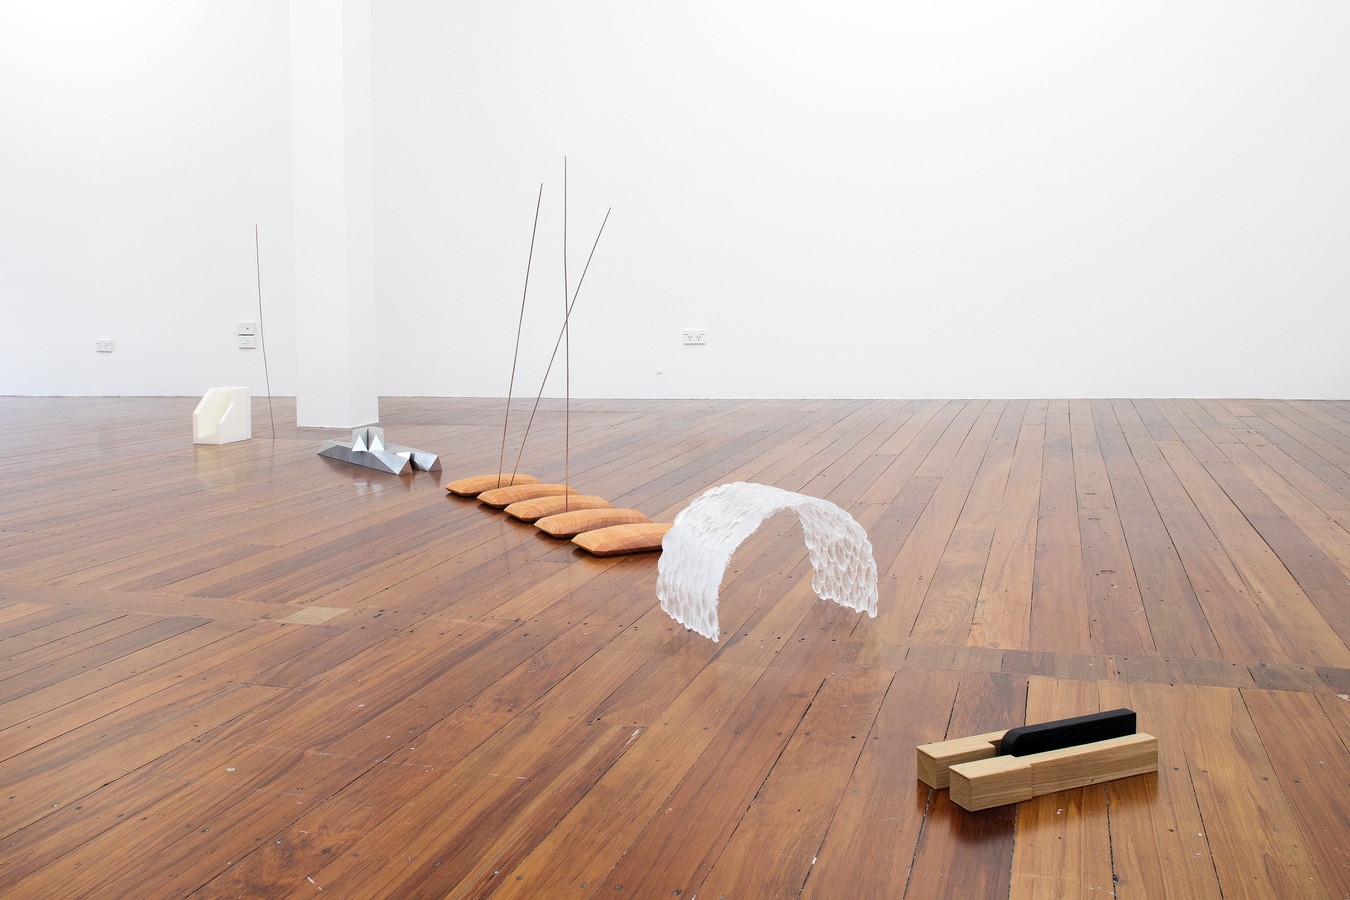 Image: Lucy Skaer, In the Shelterbelt, Arrows Rain Down, The Day is Bright and Open, Hare Darts for Cover and the Chord of C Minor Sounds (installation view), 2021. Photo: Janneth Gil.